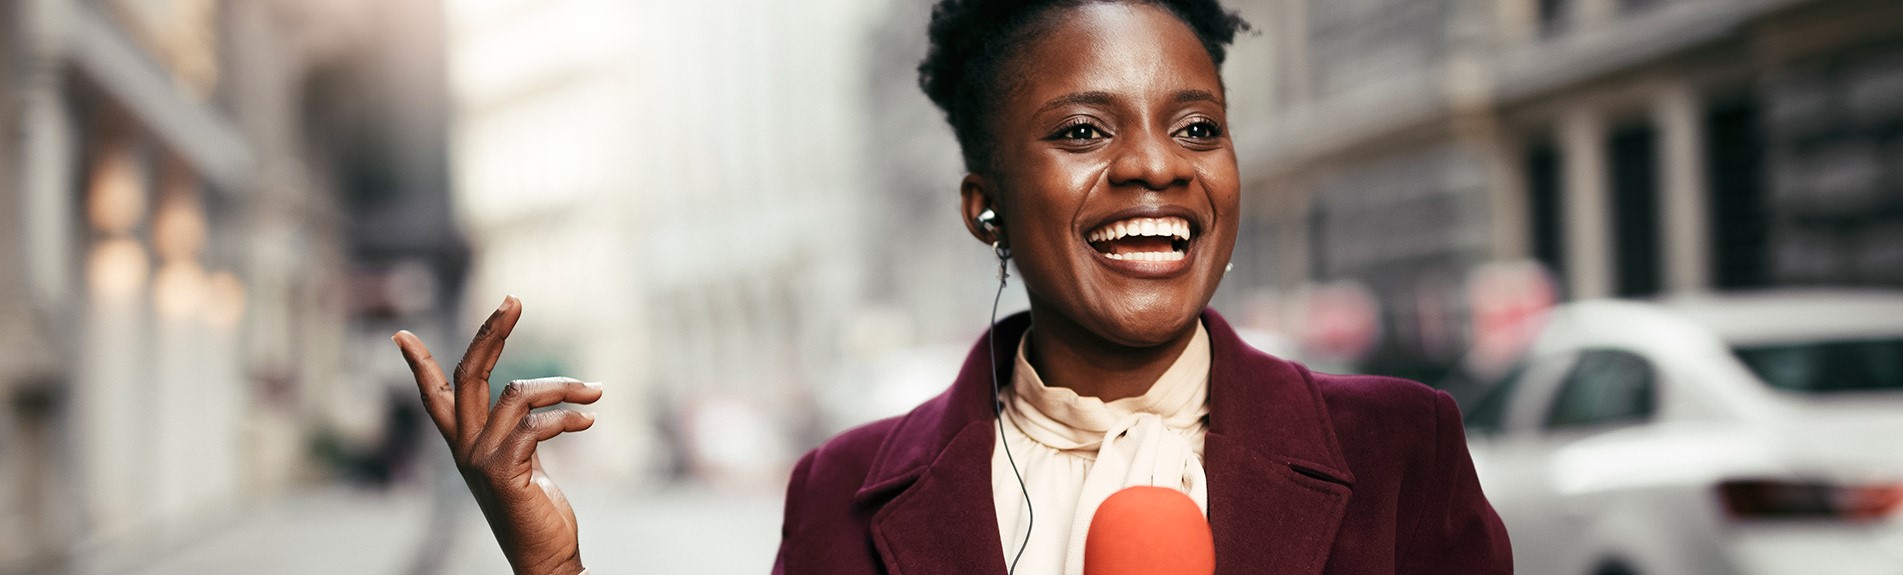 African Female News Reporter In Live Broadcasting